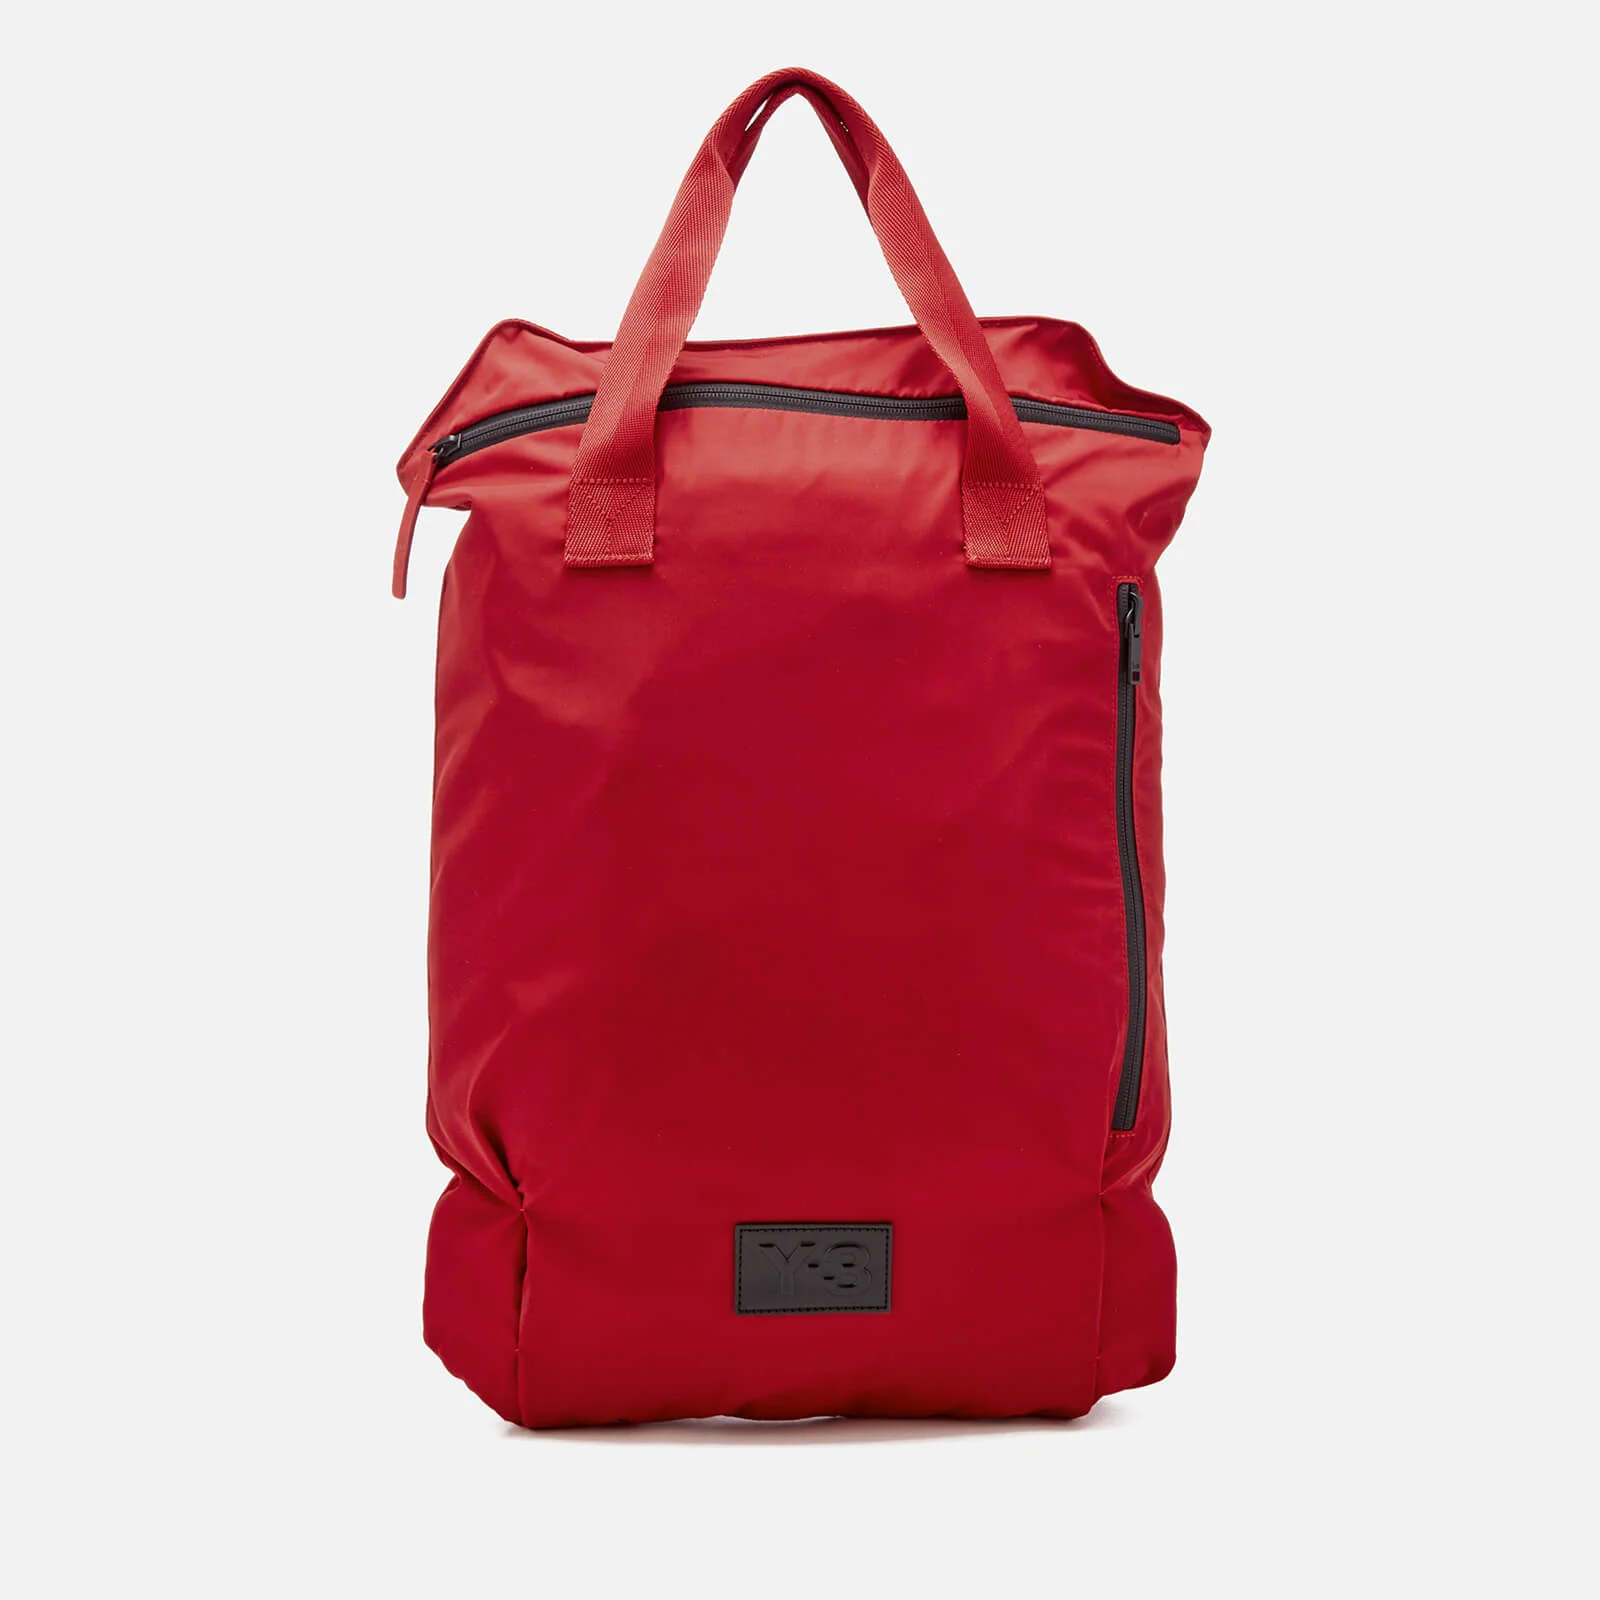 Y-3 Packable Backpack - Chilli Pepper Image 1